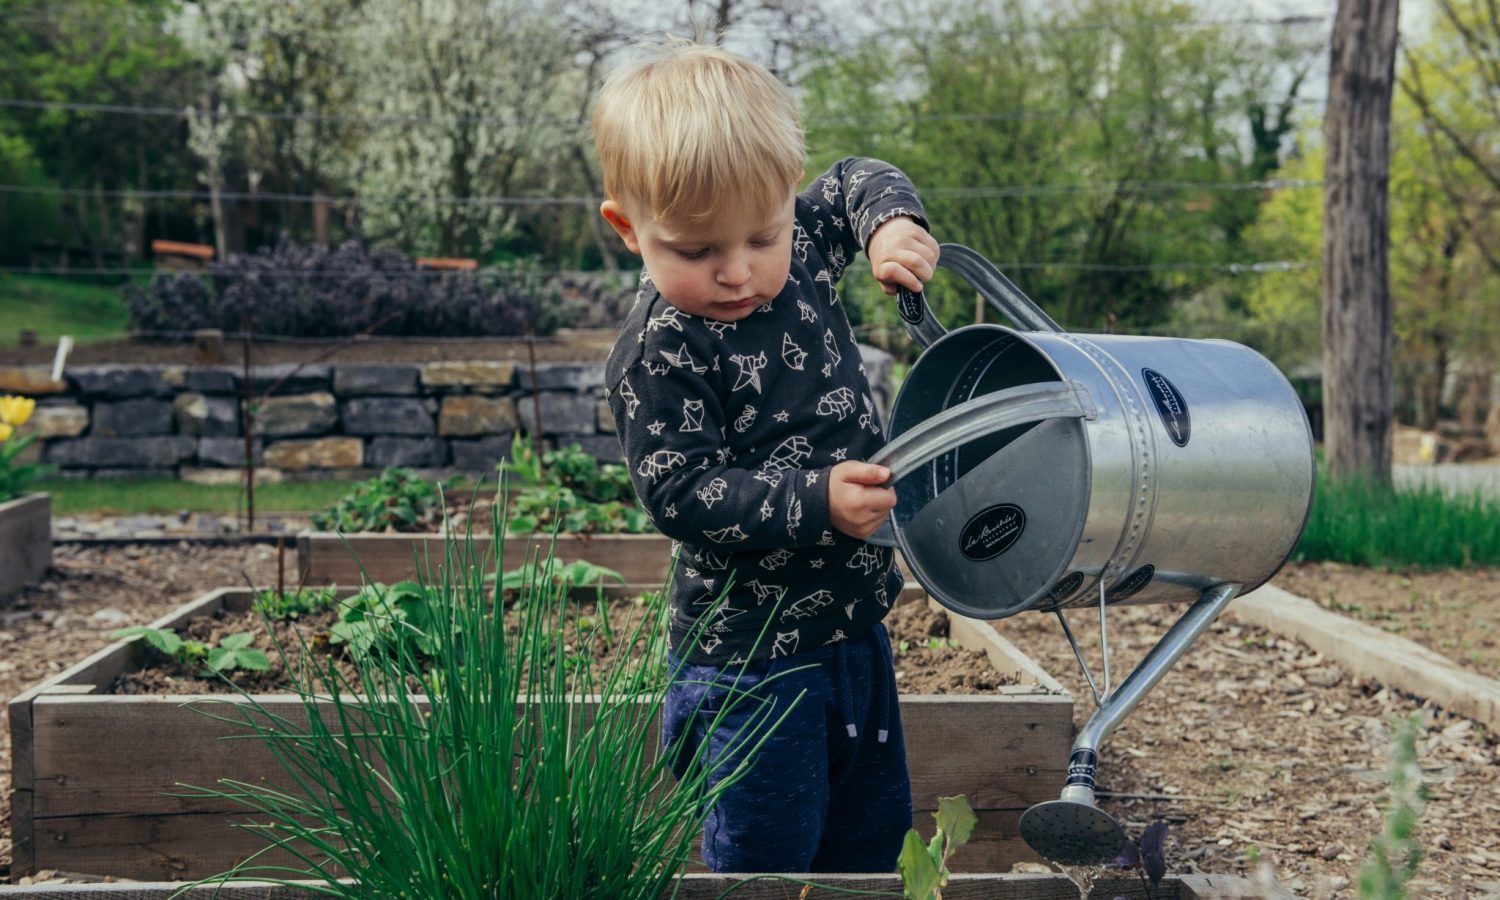 Interested In Gardening? Here Are 5 Tips That Can Help You Get Started